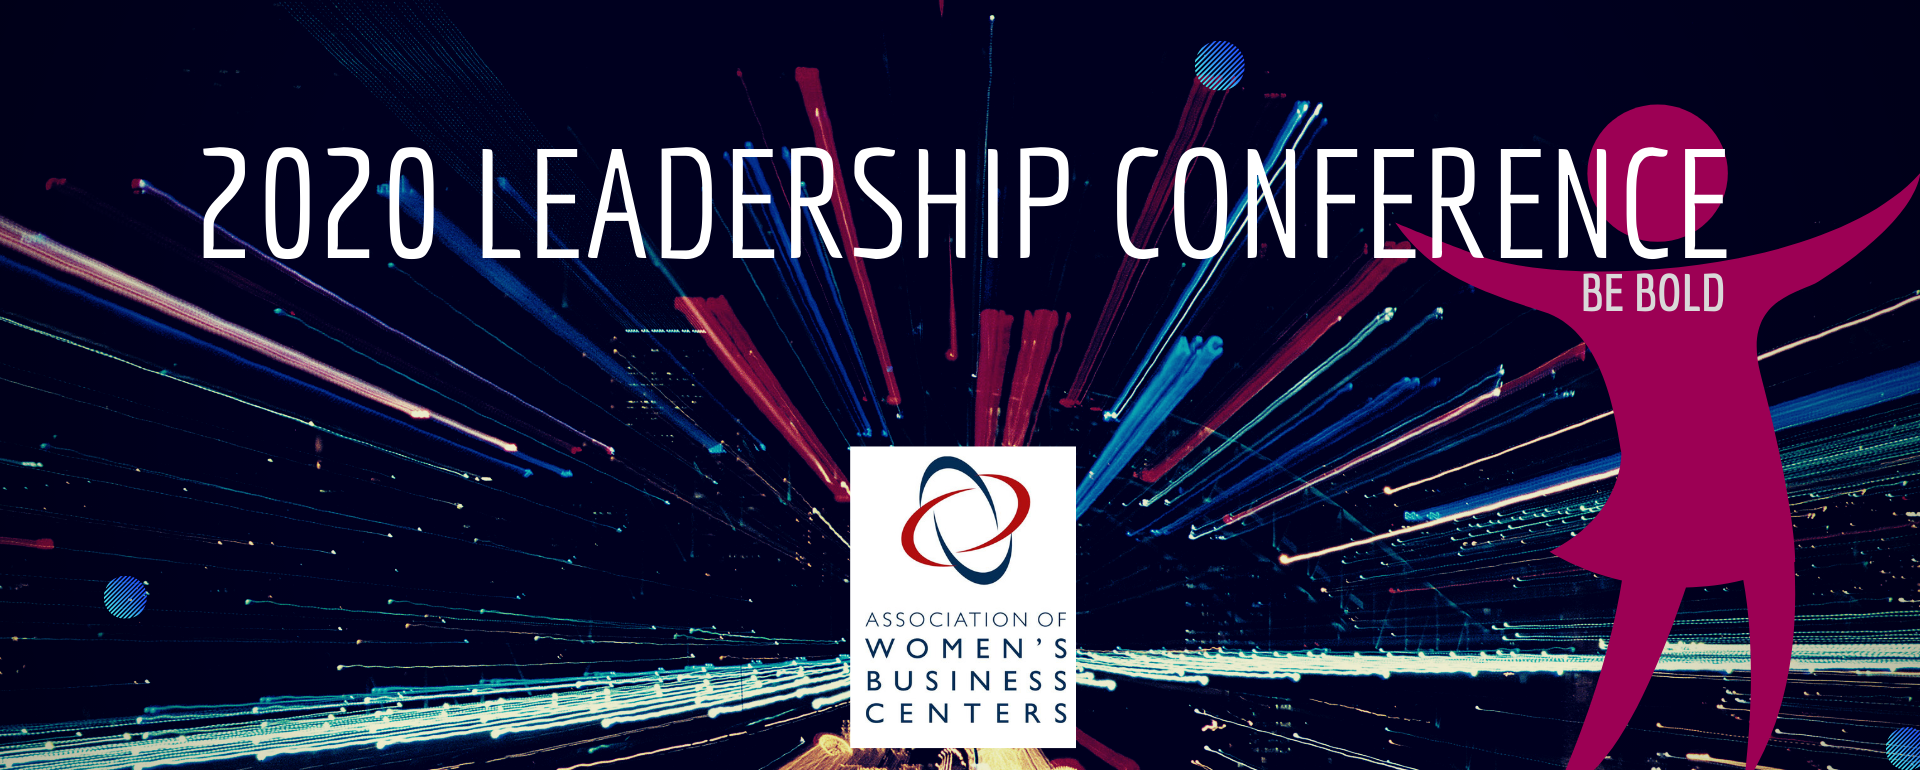 AWBC 2020 Annual Leadership Conference Association of Womens Business